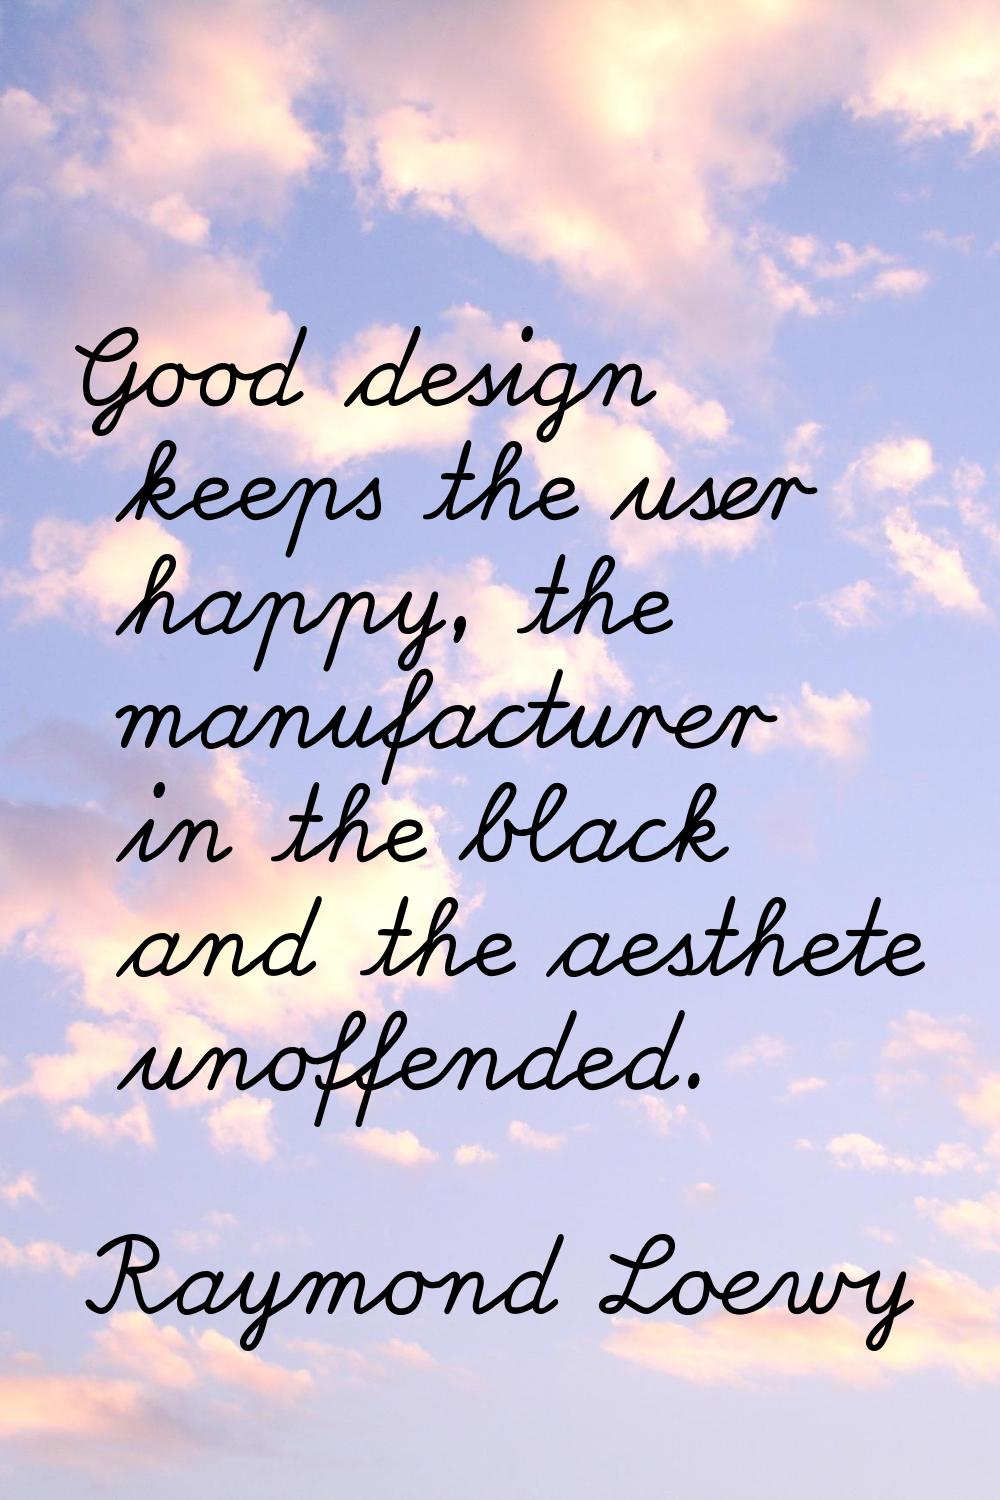 Good design keeps the user happy, the manufacturer in the black and the aesthete unoffended.